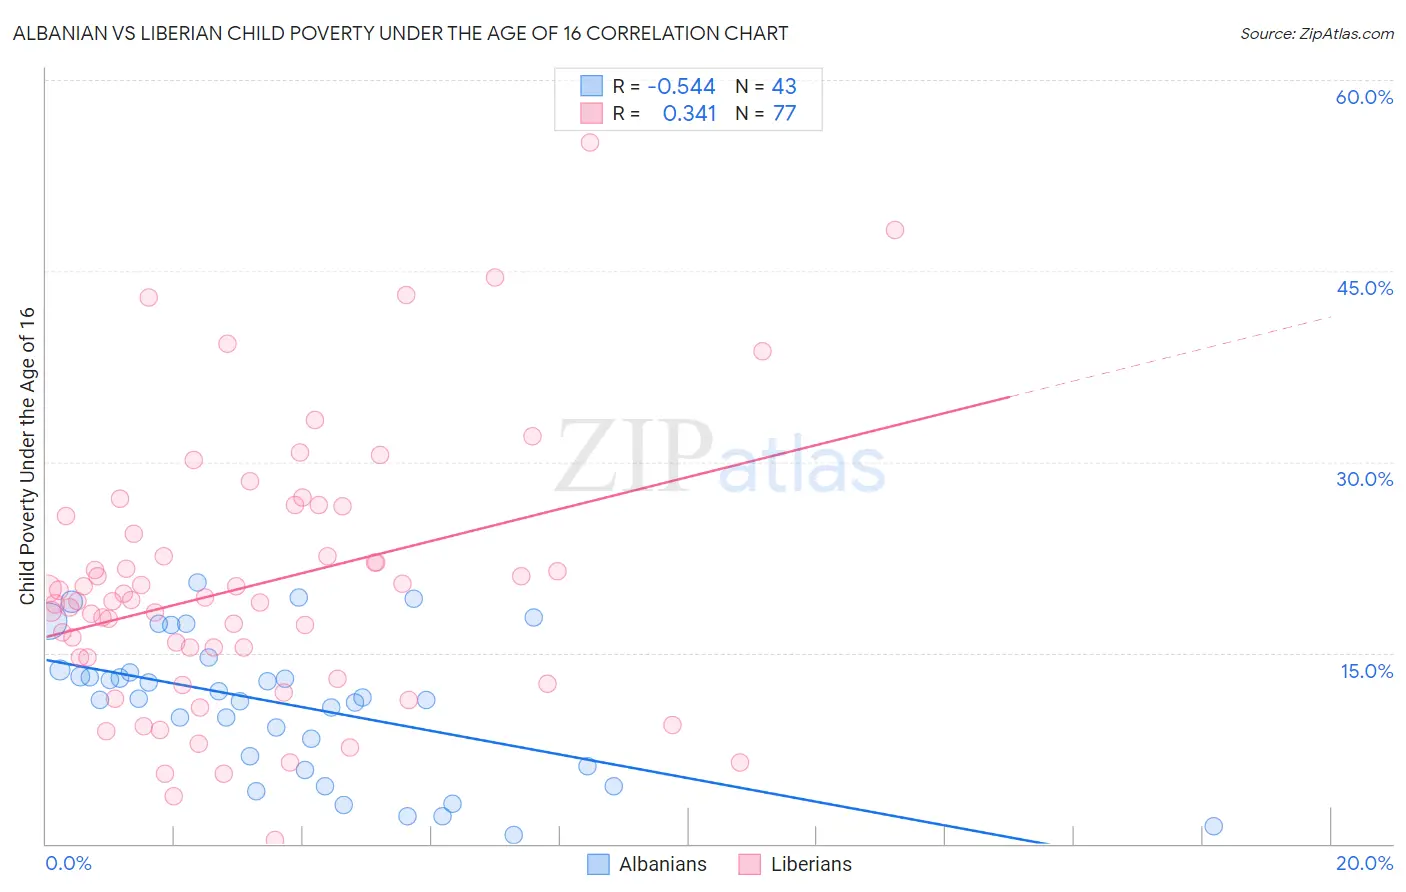 Albanian vs Liberian Child Poverty Under the Age of 16